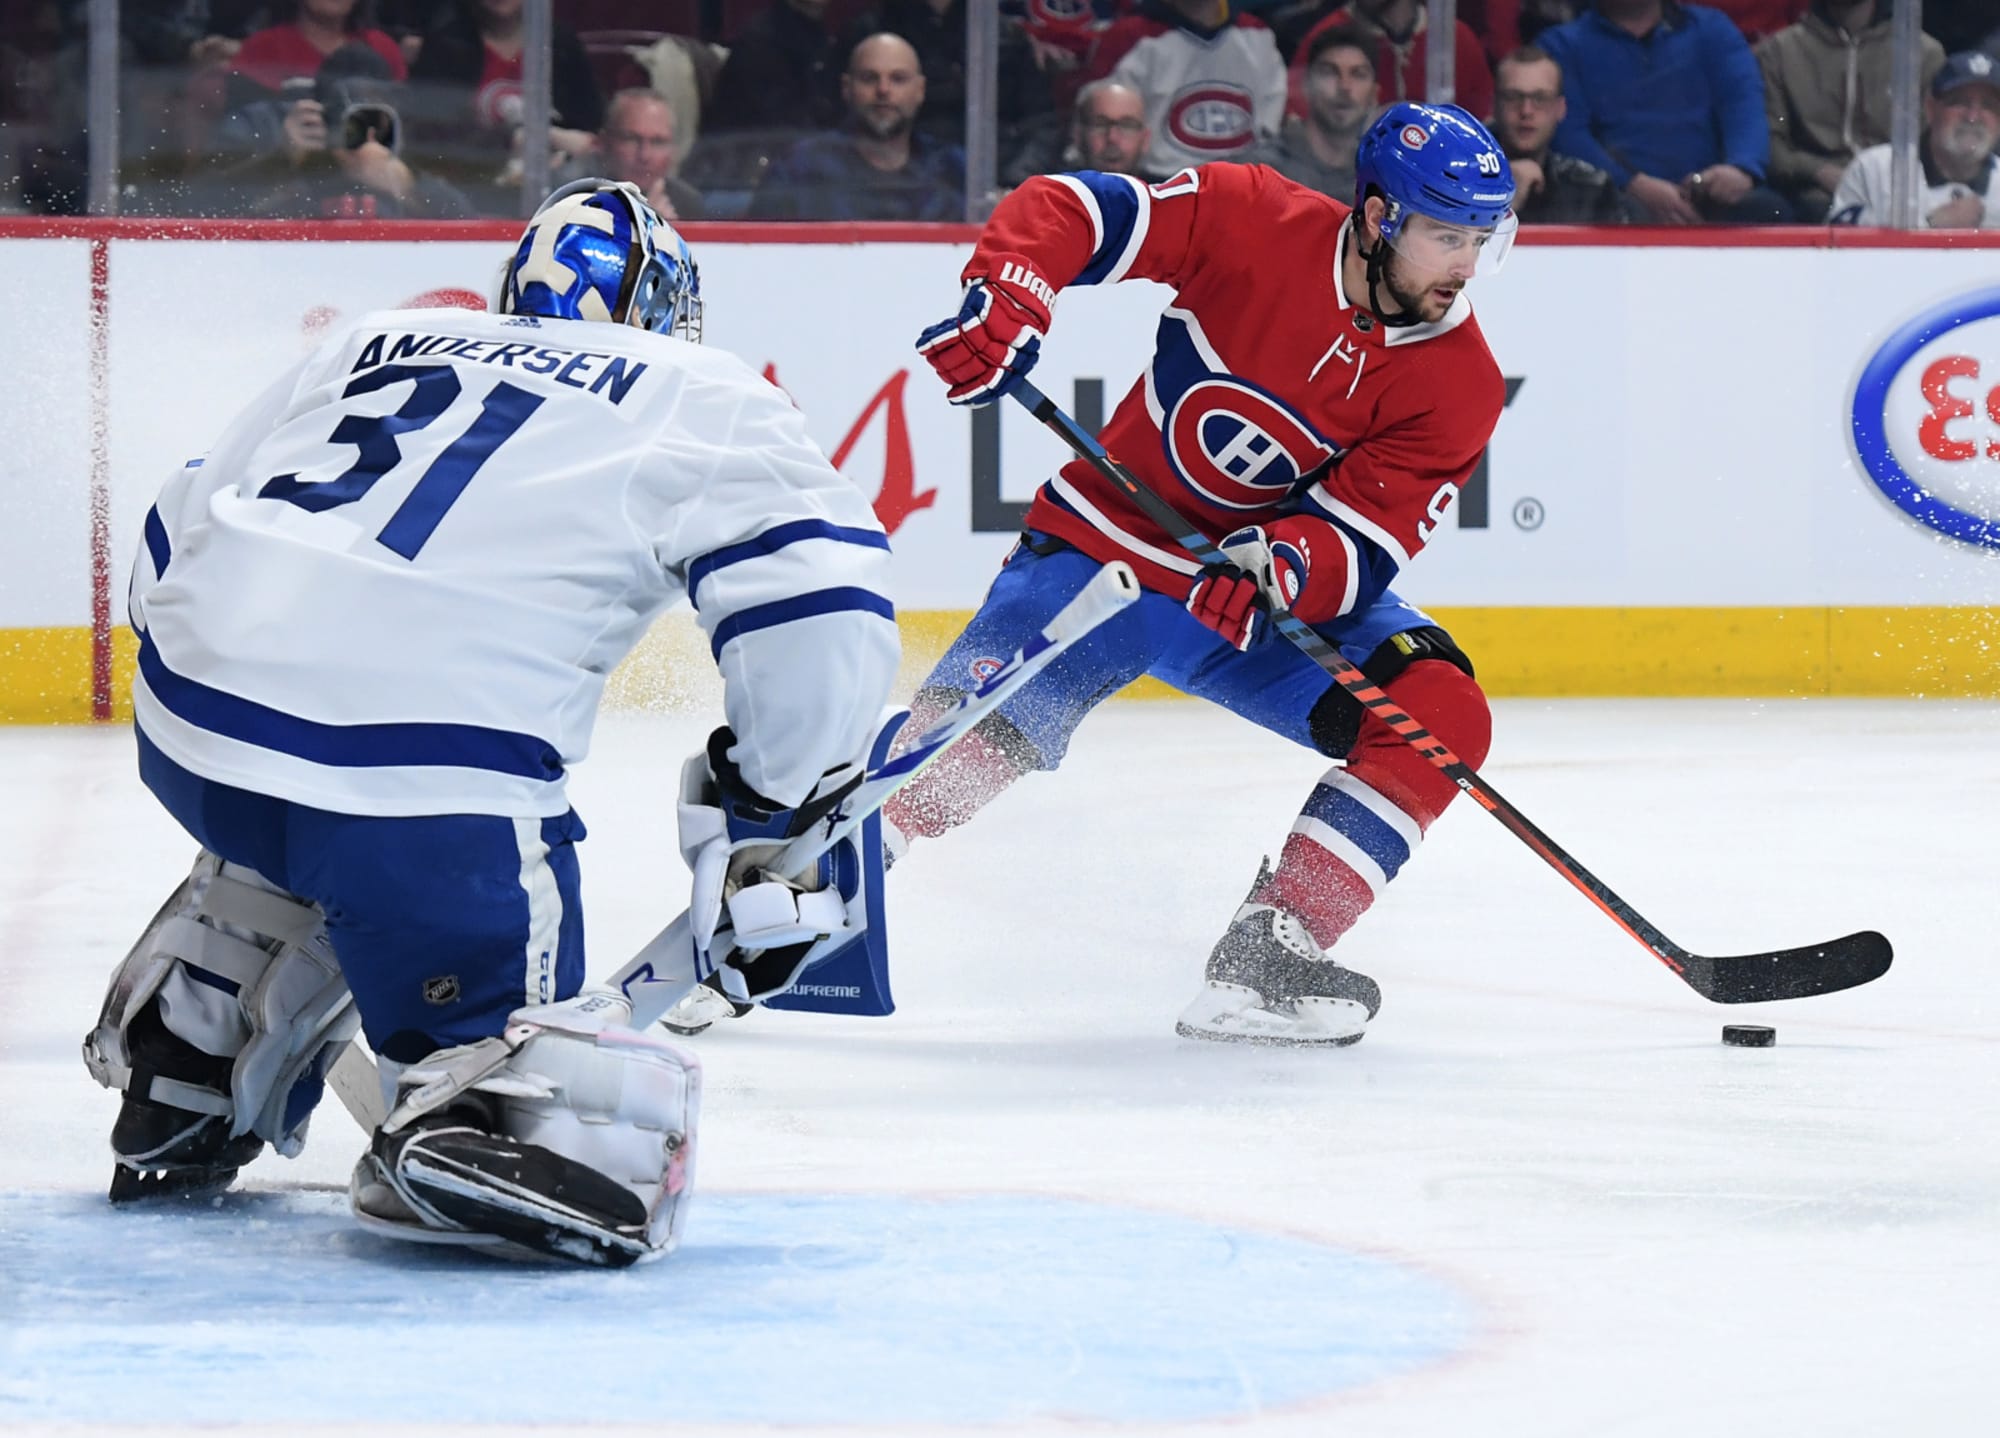 Montreal Canadiens in need of a response against the Toronto Maple Leafs